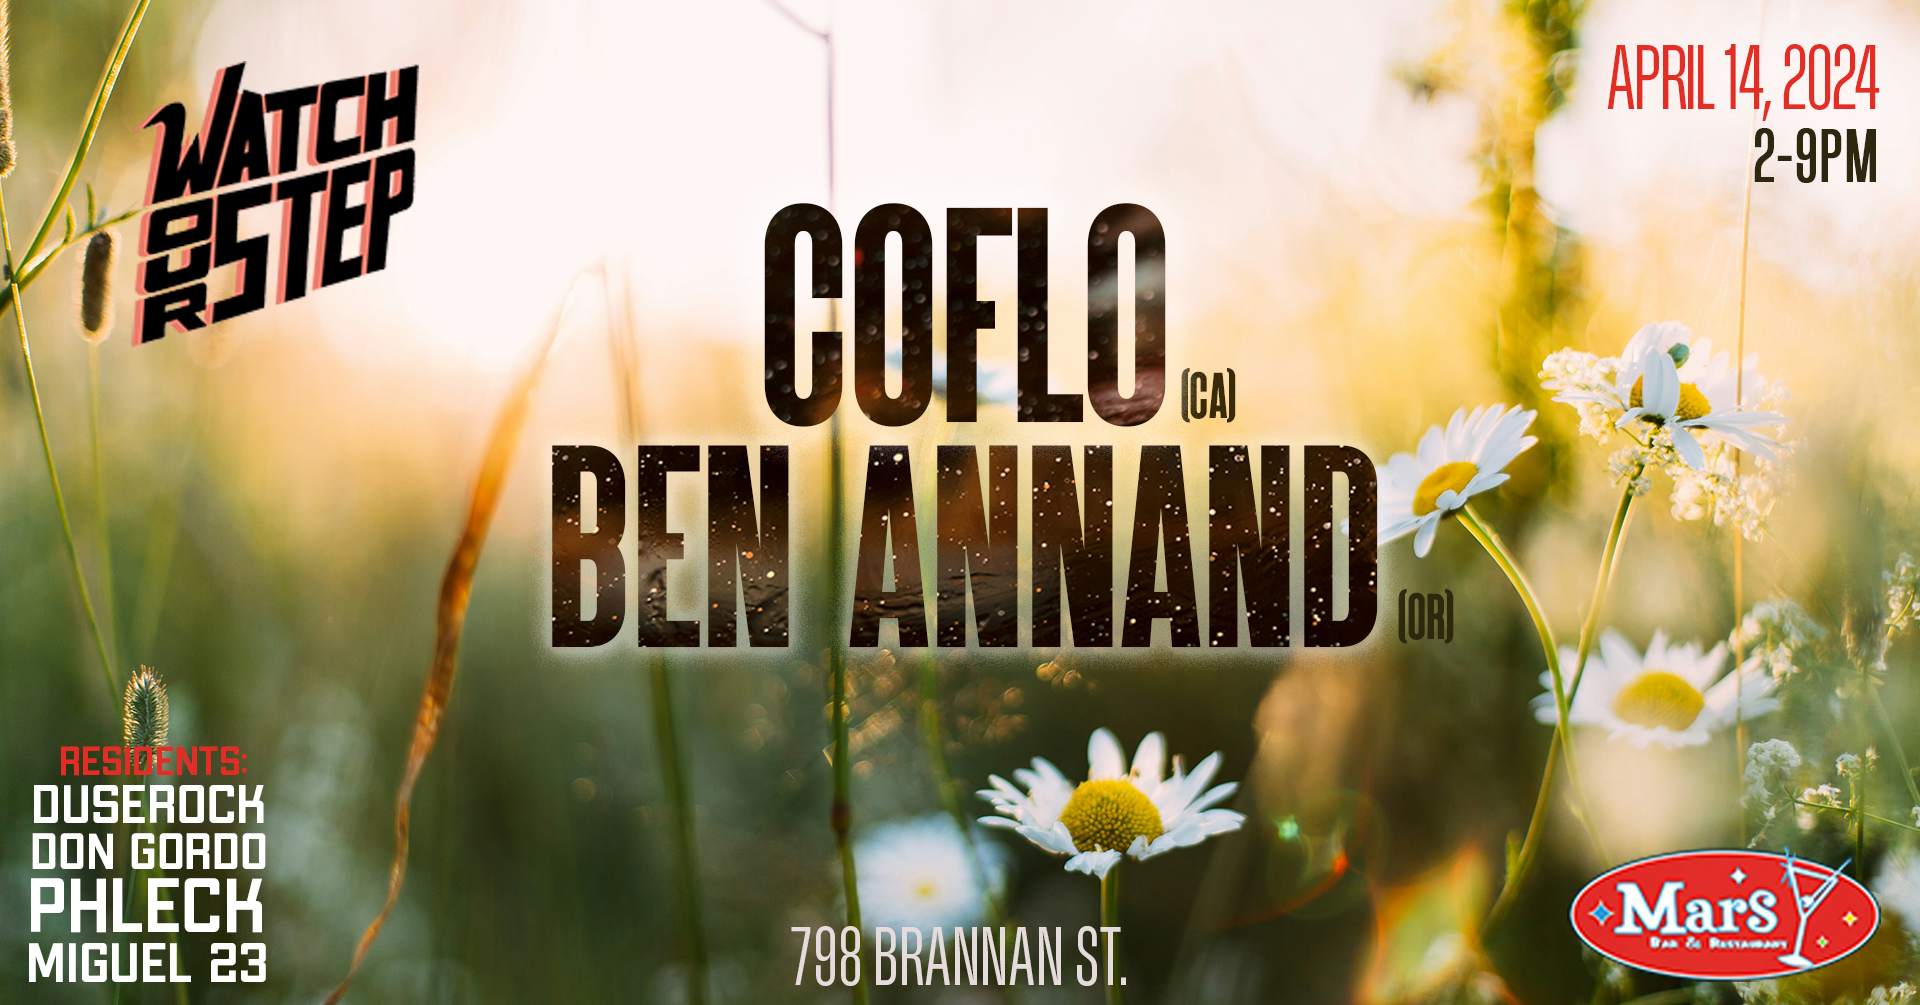 Watch Our Step feat. Coflo and Ben Annand - フライヤー表